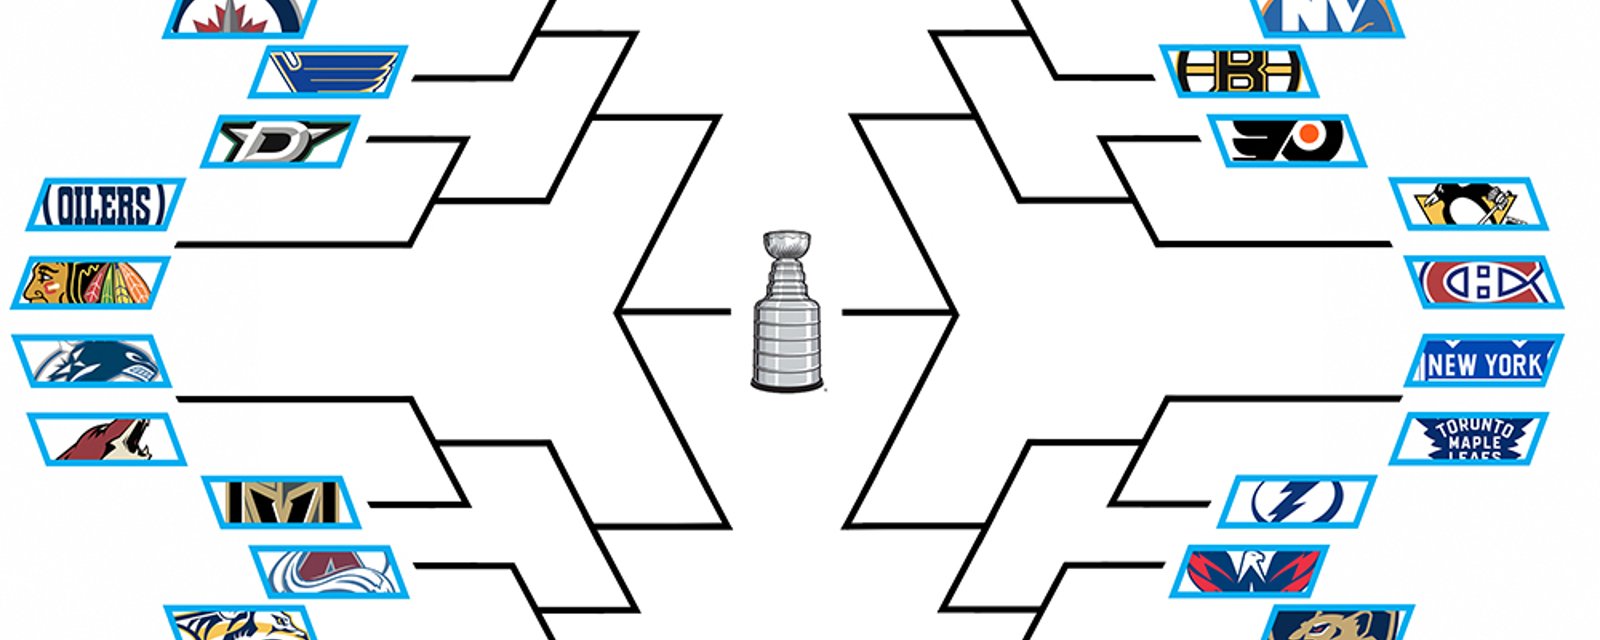 NHL makes a huge change to the 24 team playoff format